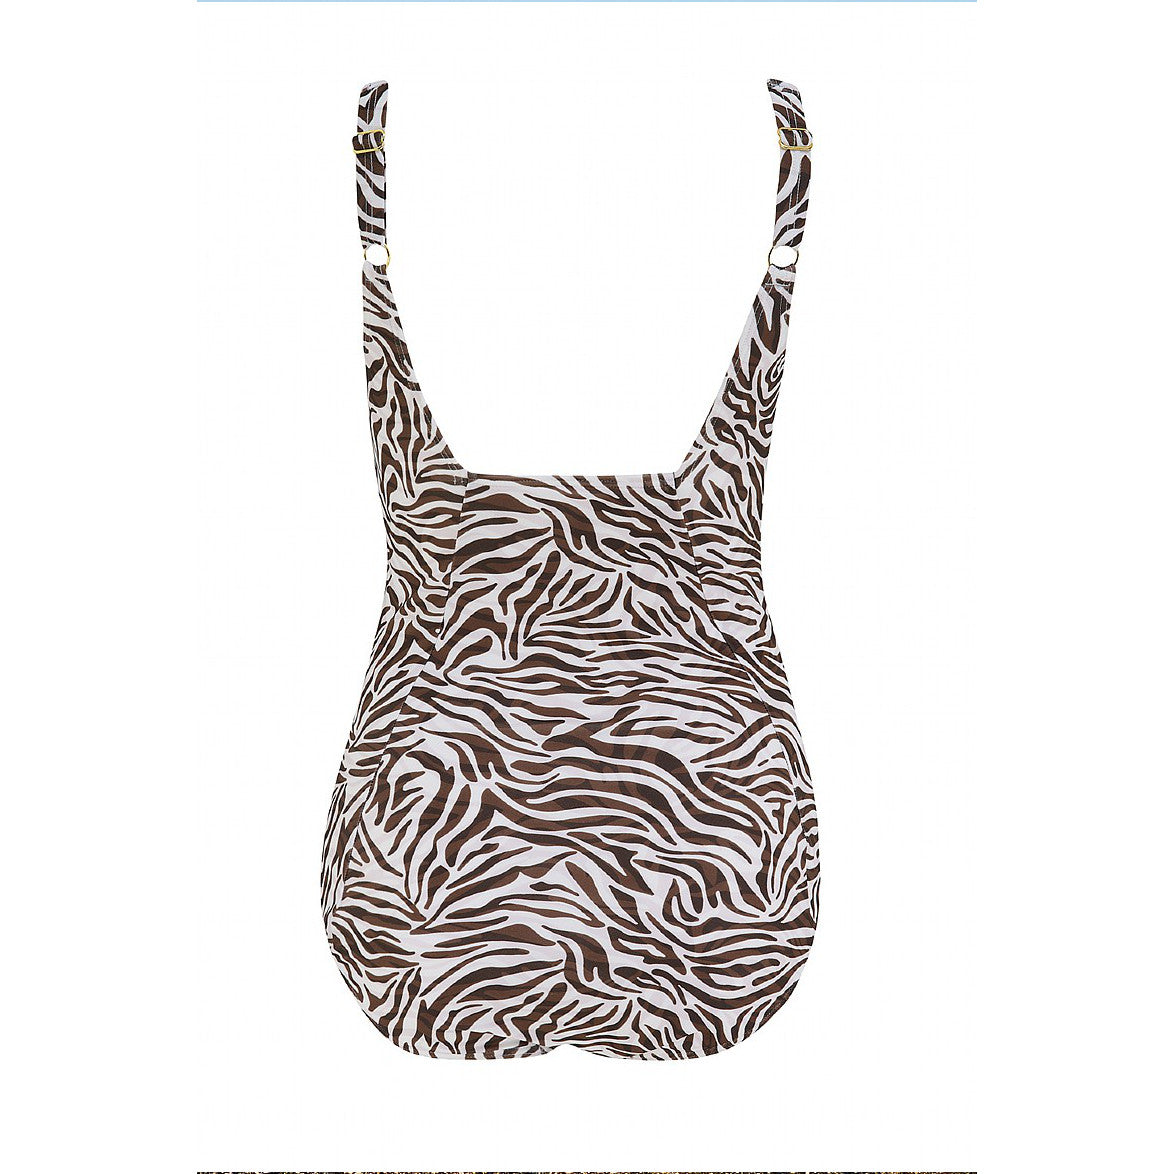 Tanzania Swimsuit in a bold zebra print | Swimwear from Nicola Jane | Pocketed mastectomy swimwear for women touched by breast cancer